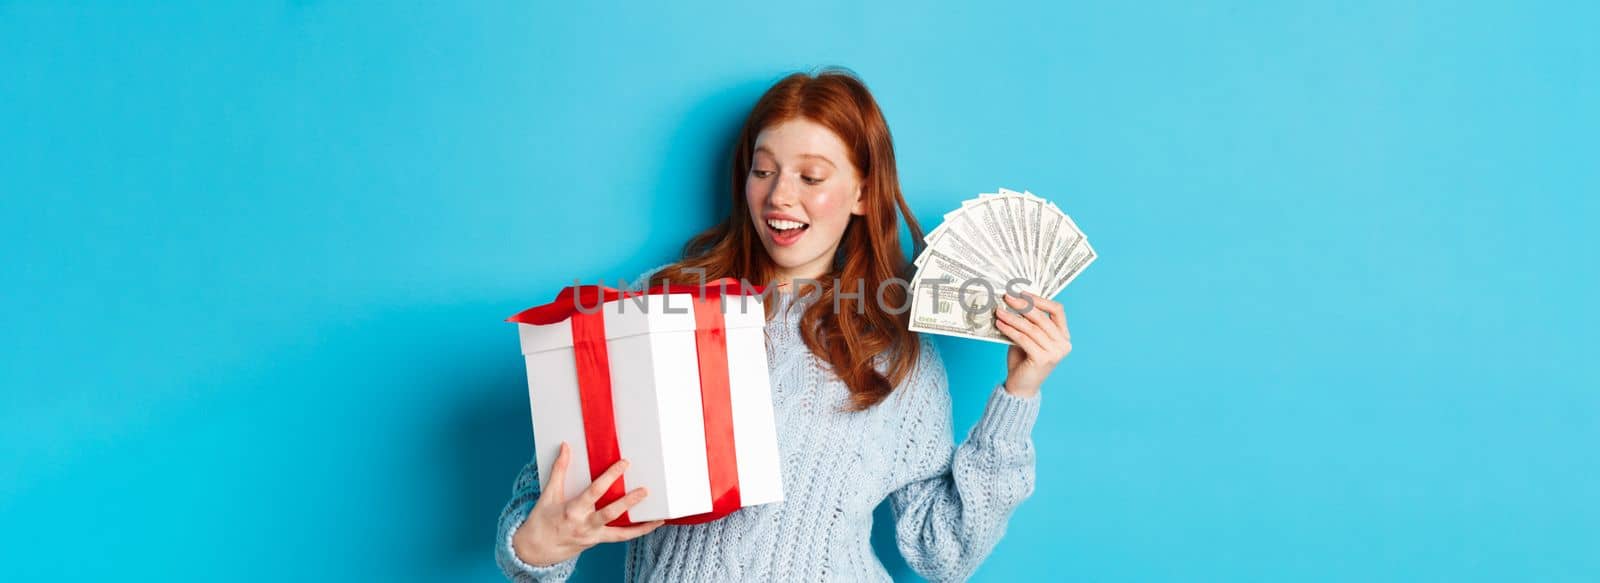 Christmas and shopping concept. Cheerful girl with red hair, holding money and big New Year gift, smiling happy, standing over blue background.